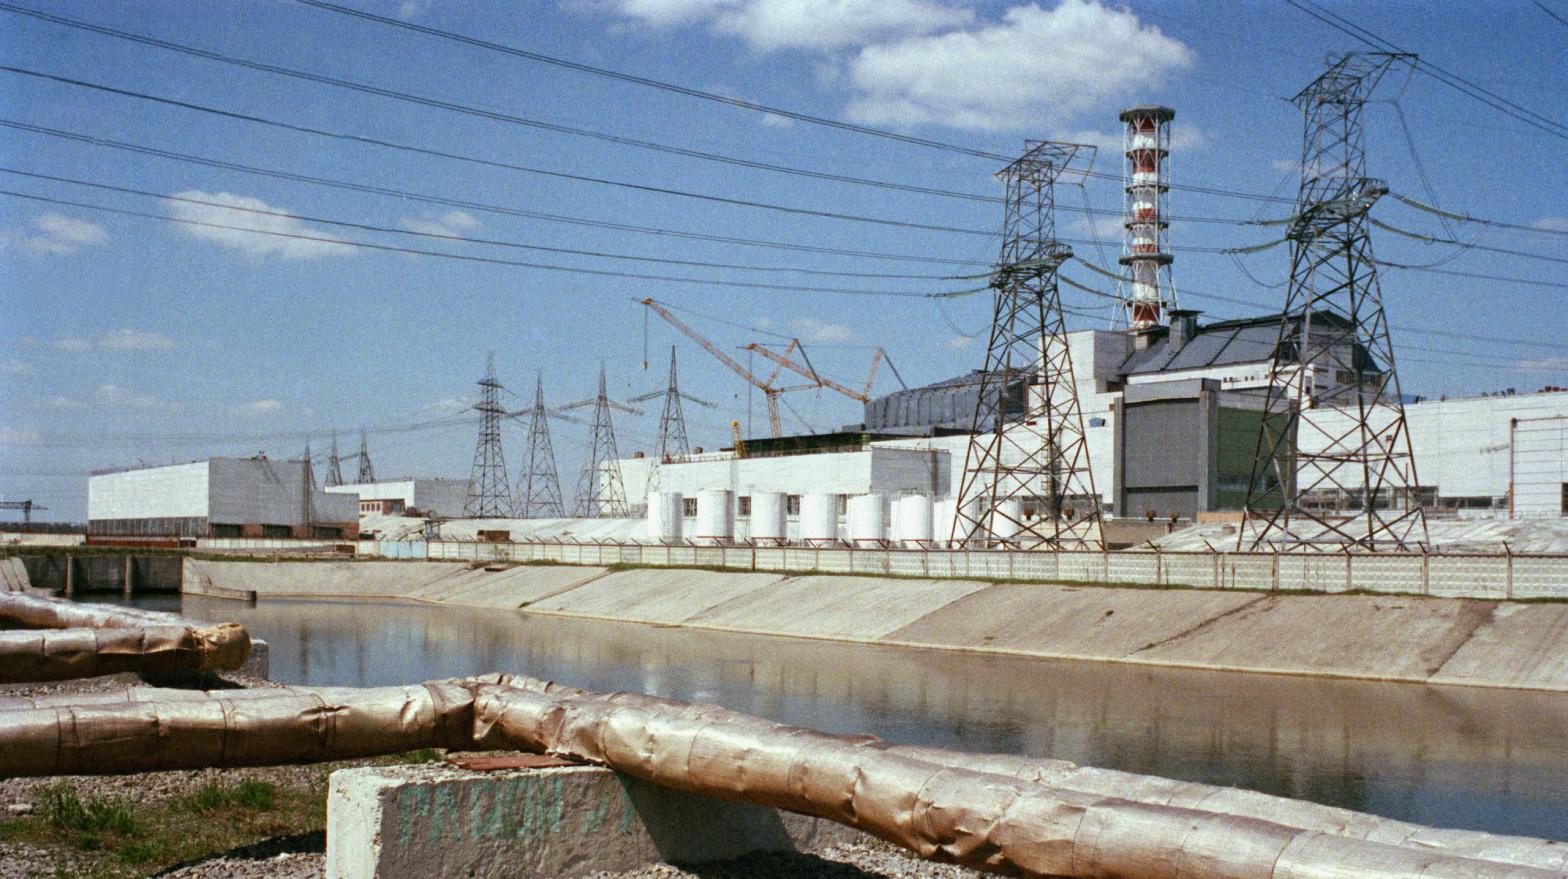 The ruined No. 4 reactor at Chernobyl nuclear power plant in 1987, some 14 months after the disaster.  (Image: Mark J. Porubcansky, AP)